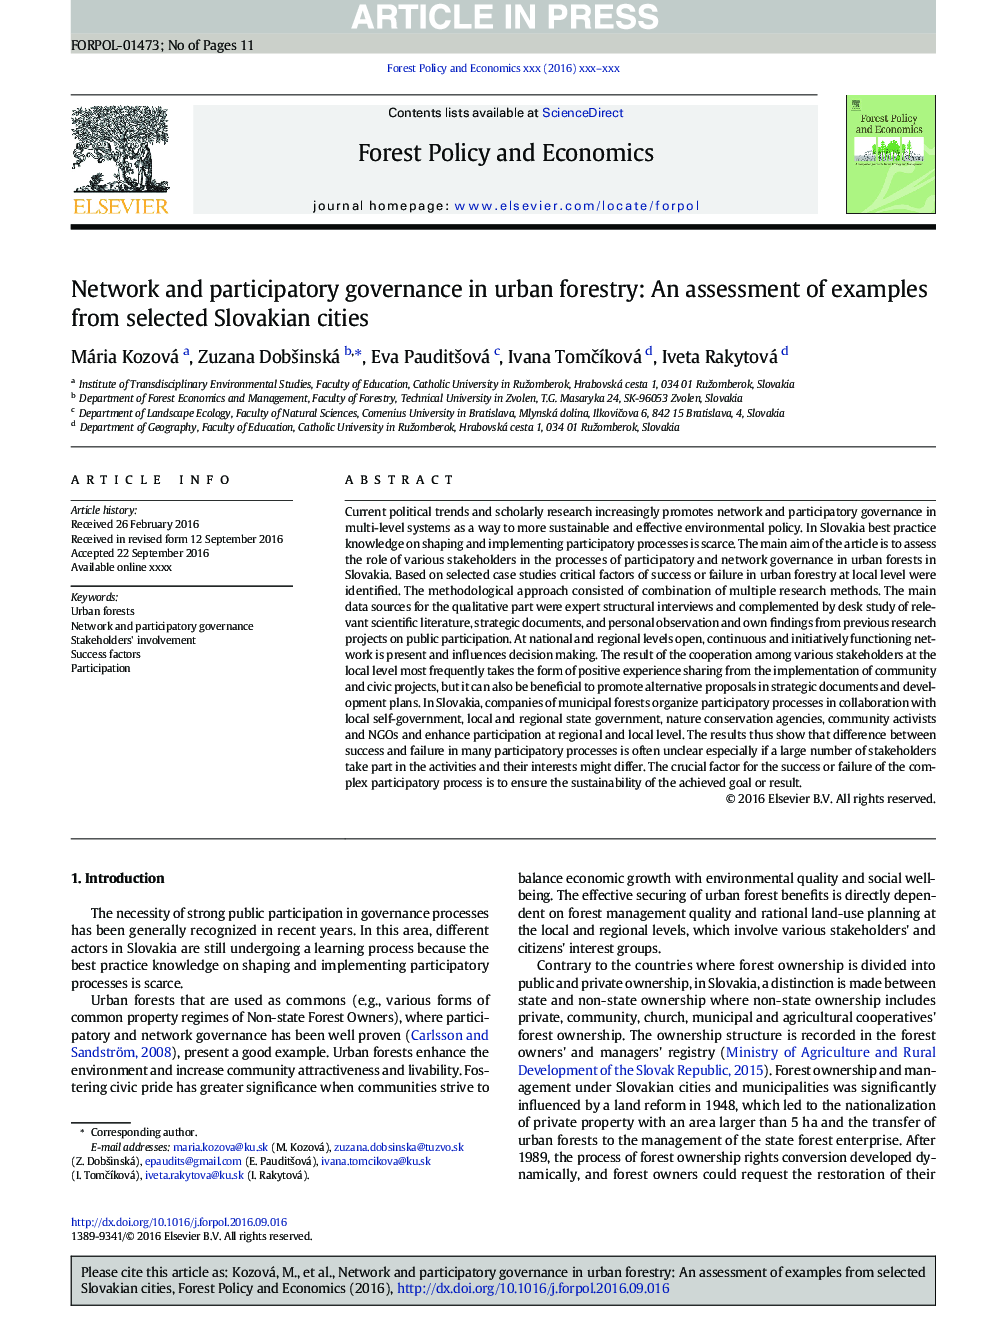 Network and participatory governance in urban forestry: An assessment of examples from selected Slovakian cities